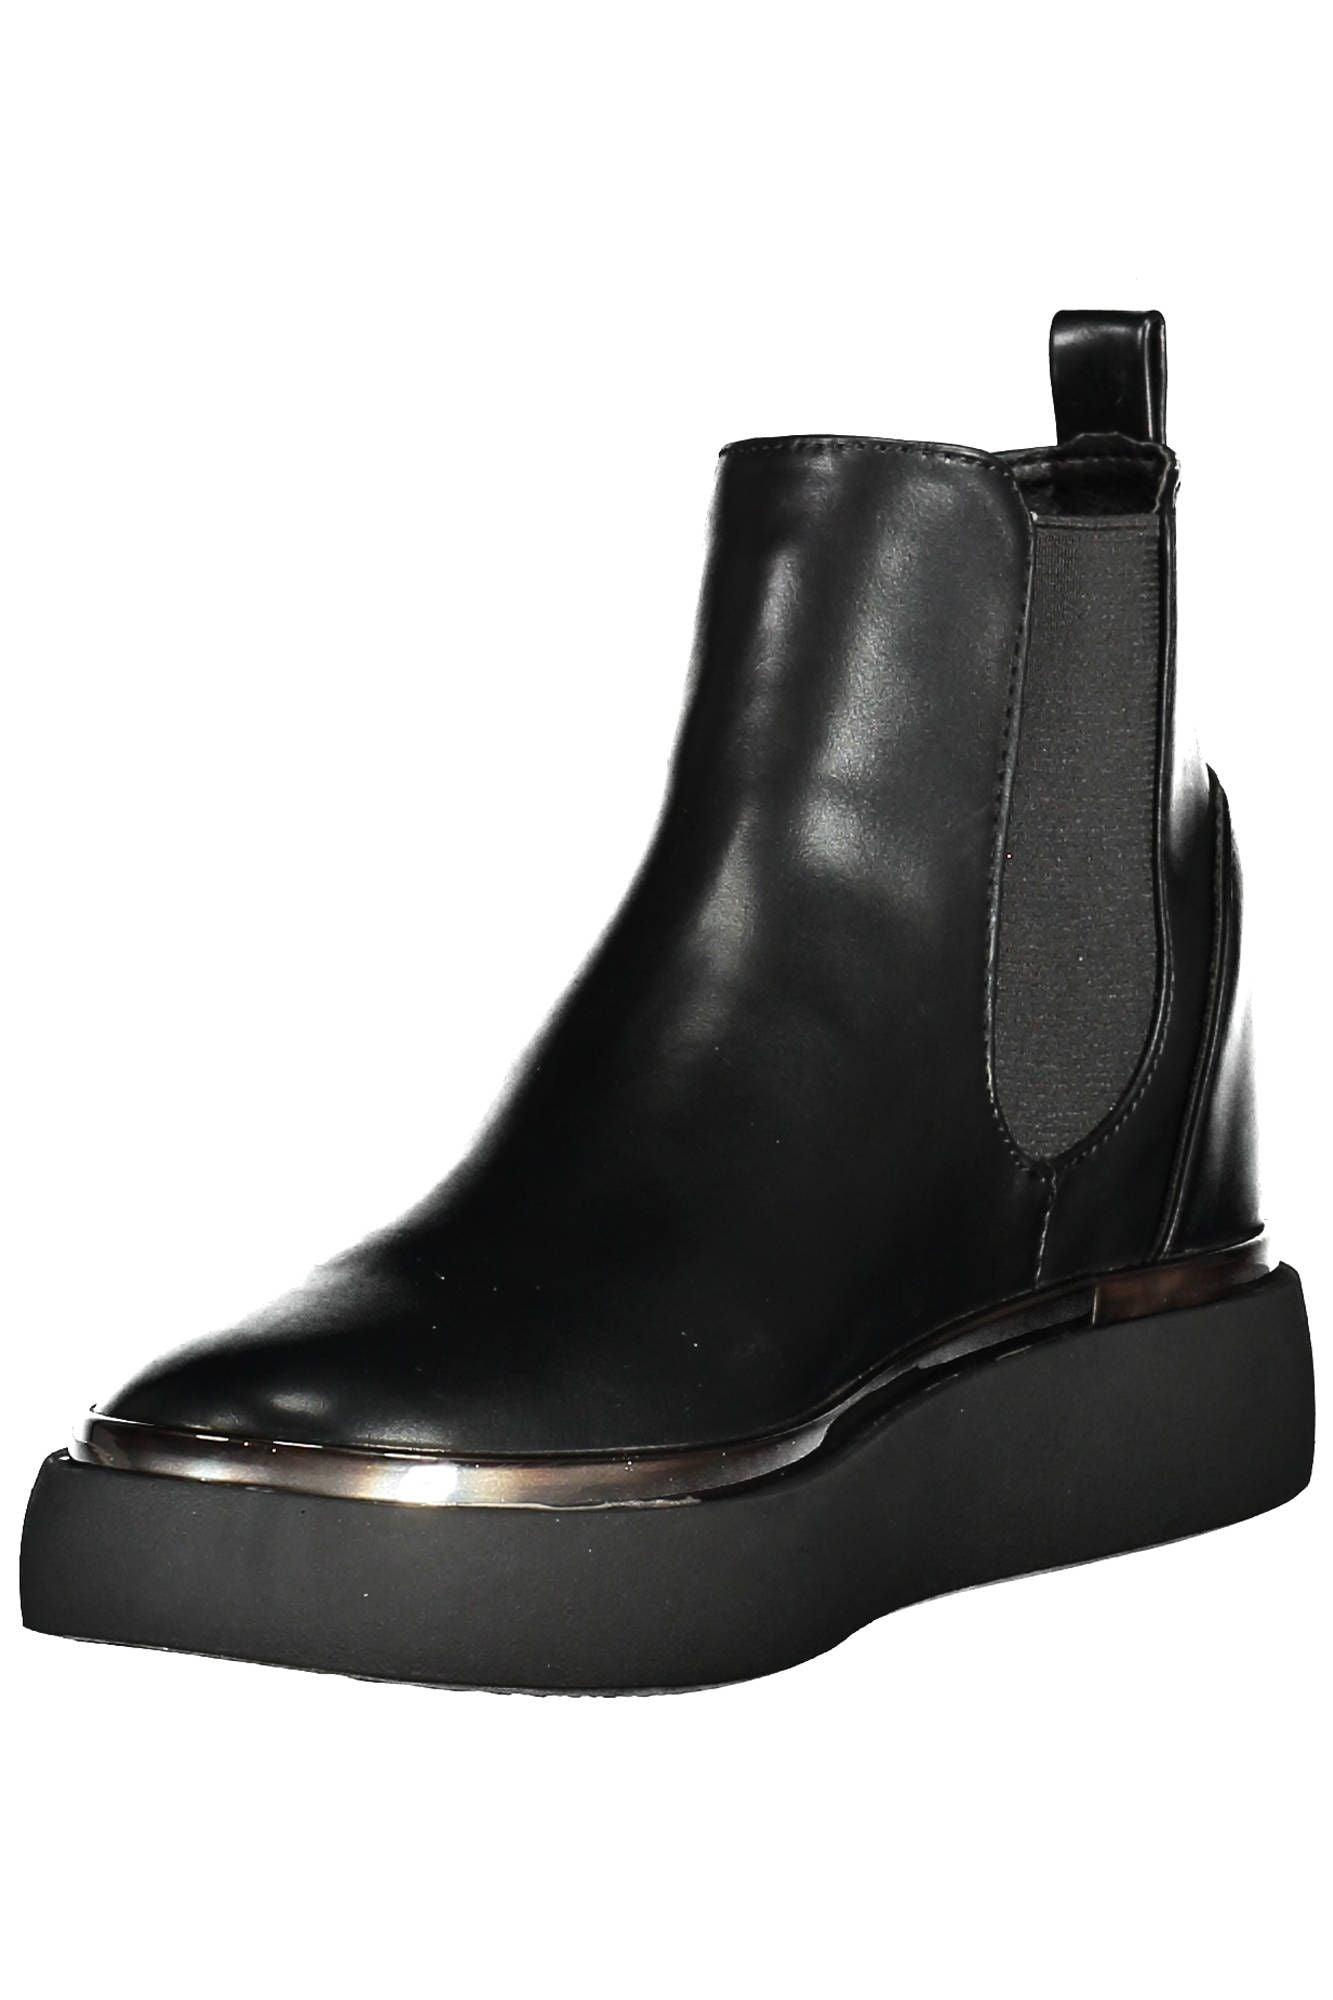 U.S. POLO ASSN. Chic Low Ankle Boot with Contrasting Details - PER.FASHION